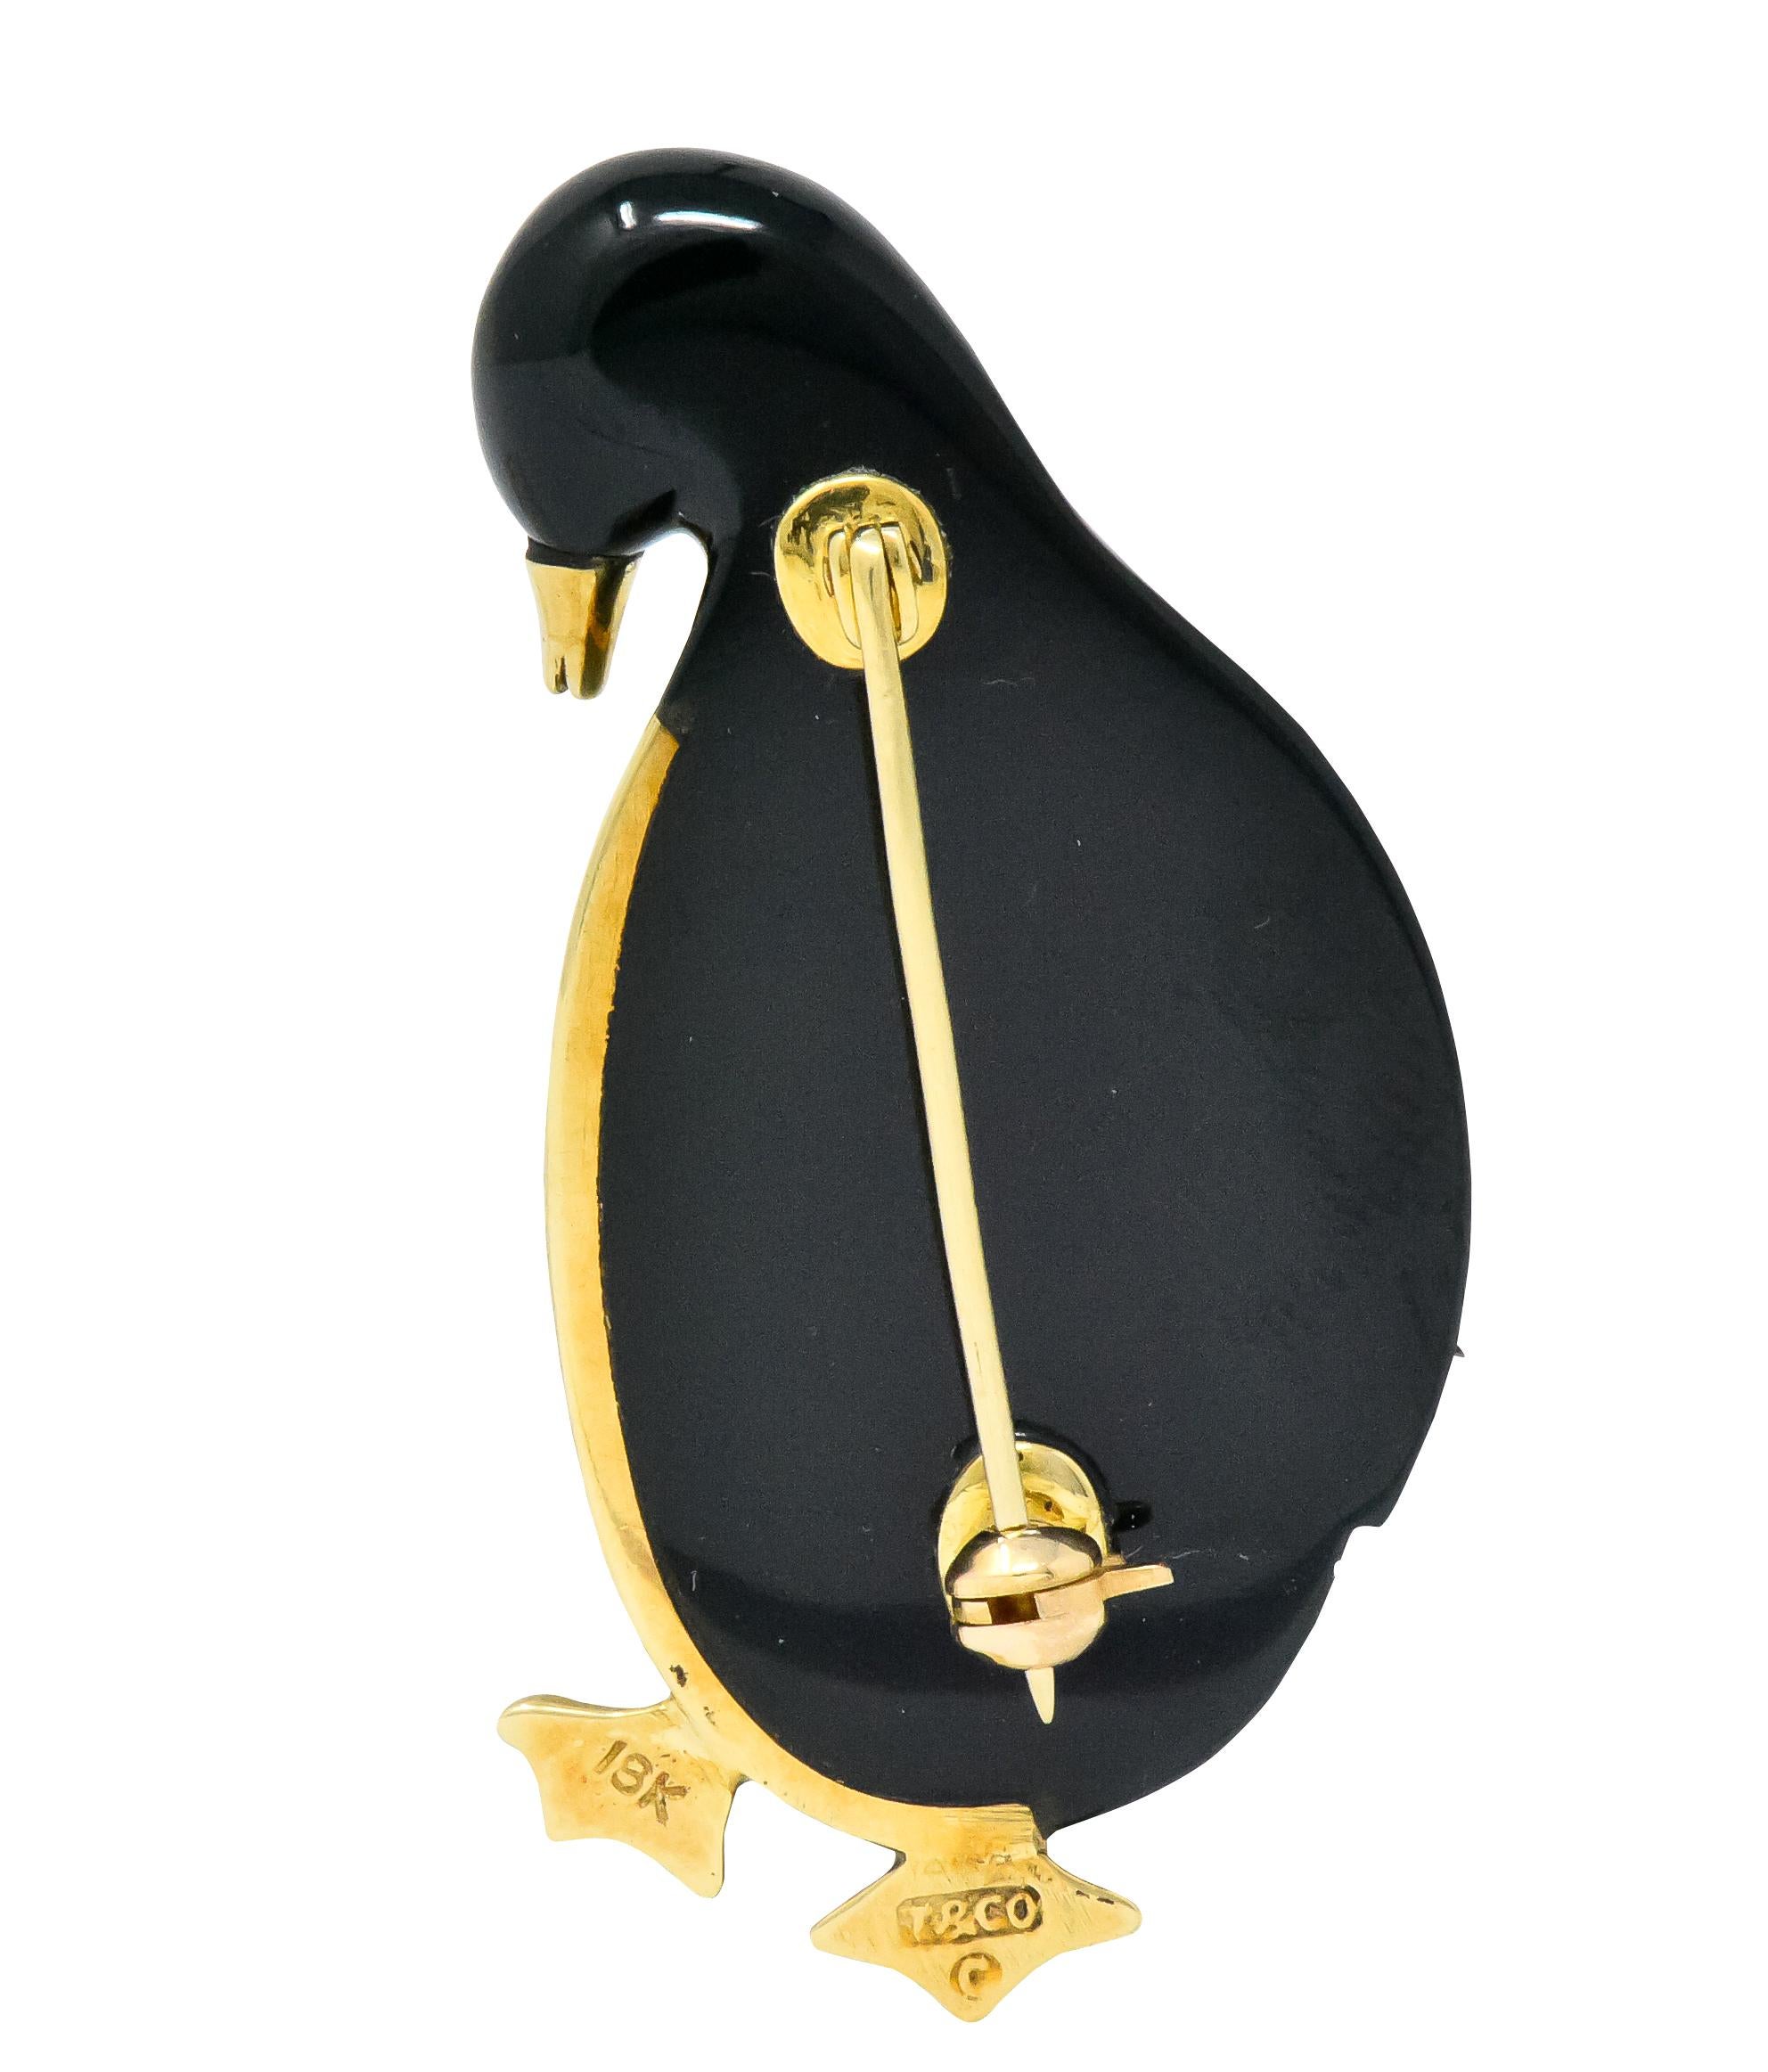 Designed as an emperor penguin with carved black jade and mother-of-pearl body

Polished gold webbed feet, beak and detailing

signed T & Co. and stamped 18K

Circa 1970

Measuring: 1 5/8 x 3/4 inches

Total Weight: 12.5 Grams

Adorable. Whimsical.